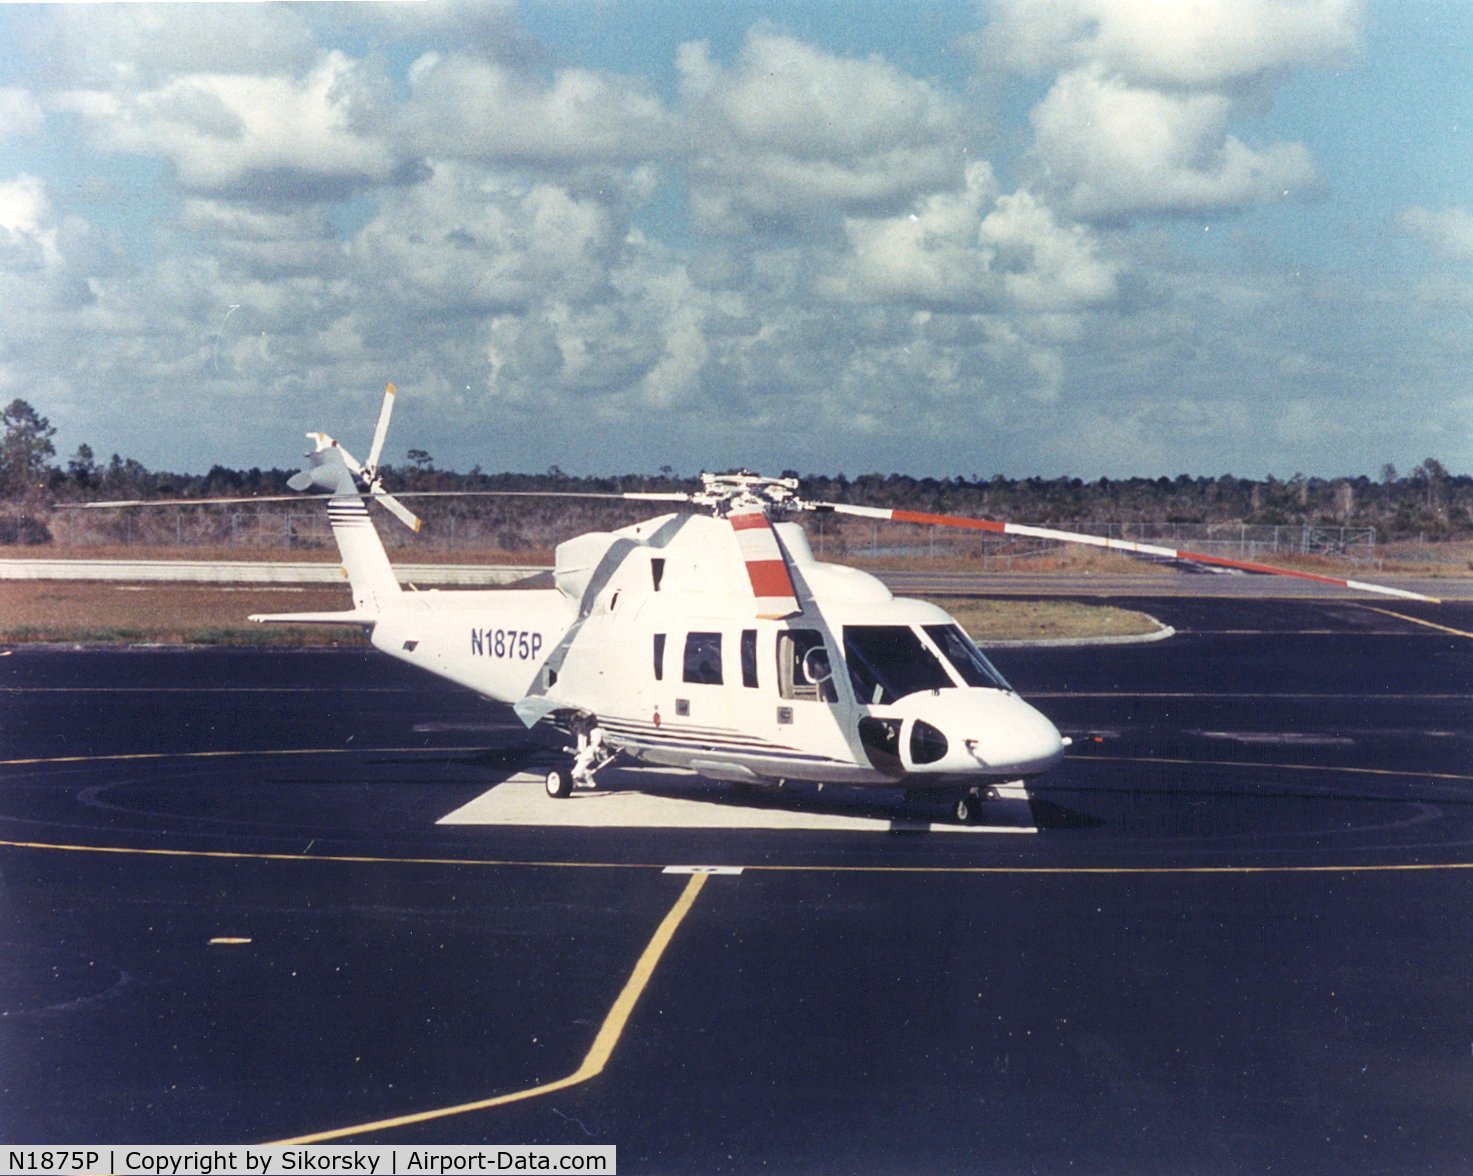 N1875P, 1998 Sikorsky S-76C C/N 760488, N1875P at Sikorsky's West Palm Beach delivery center